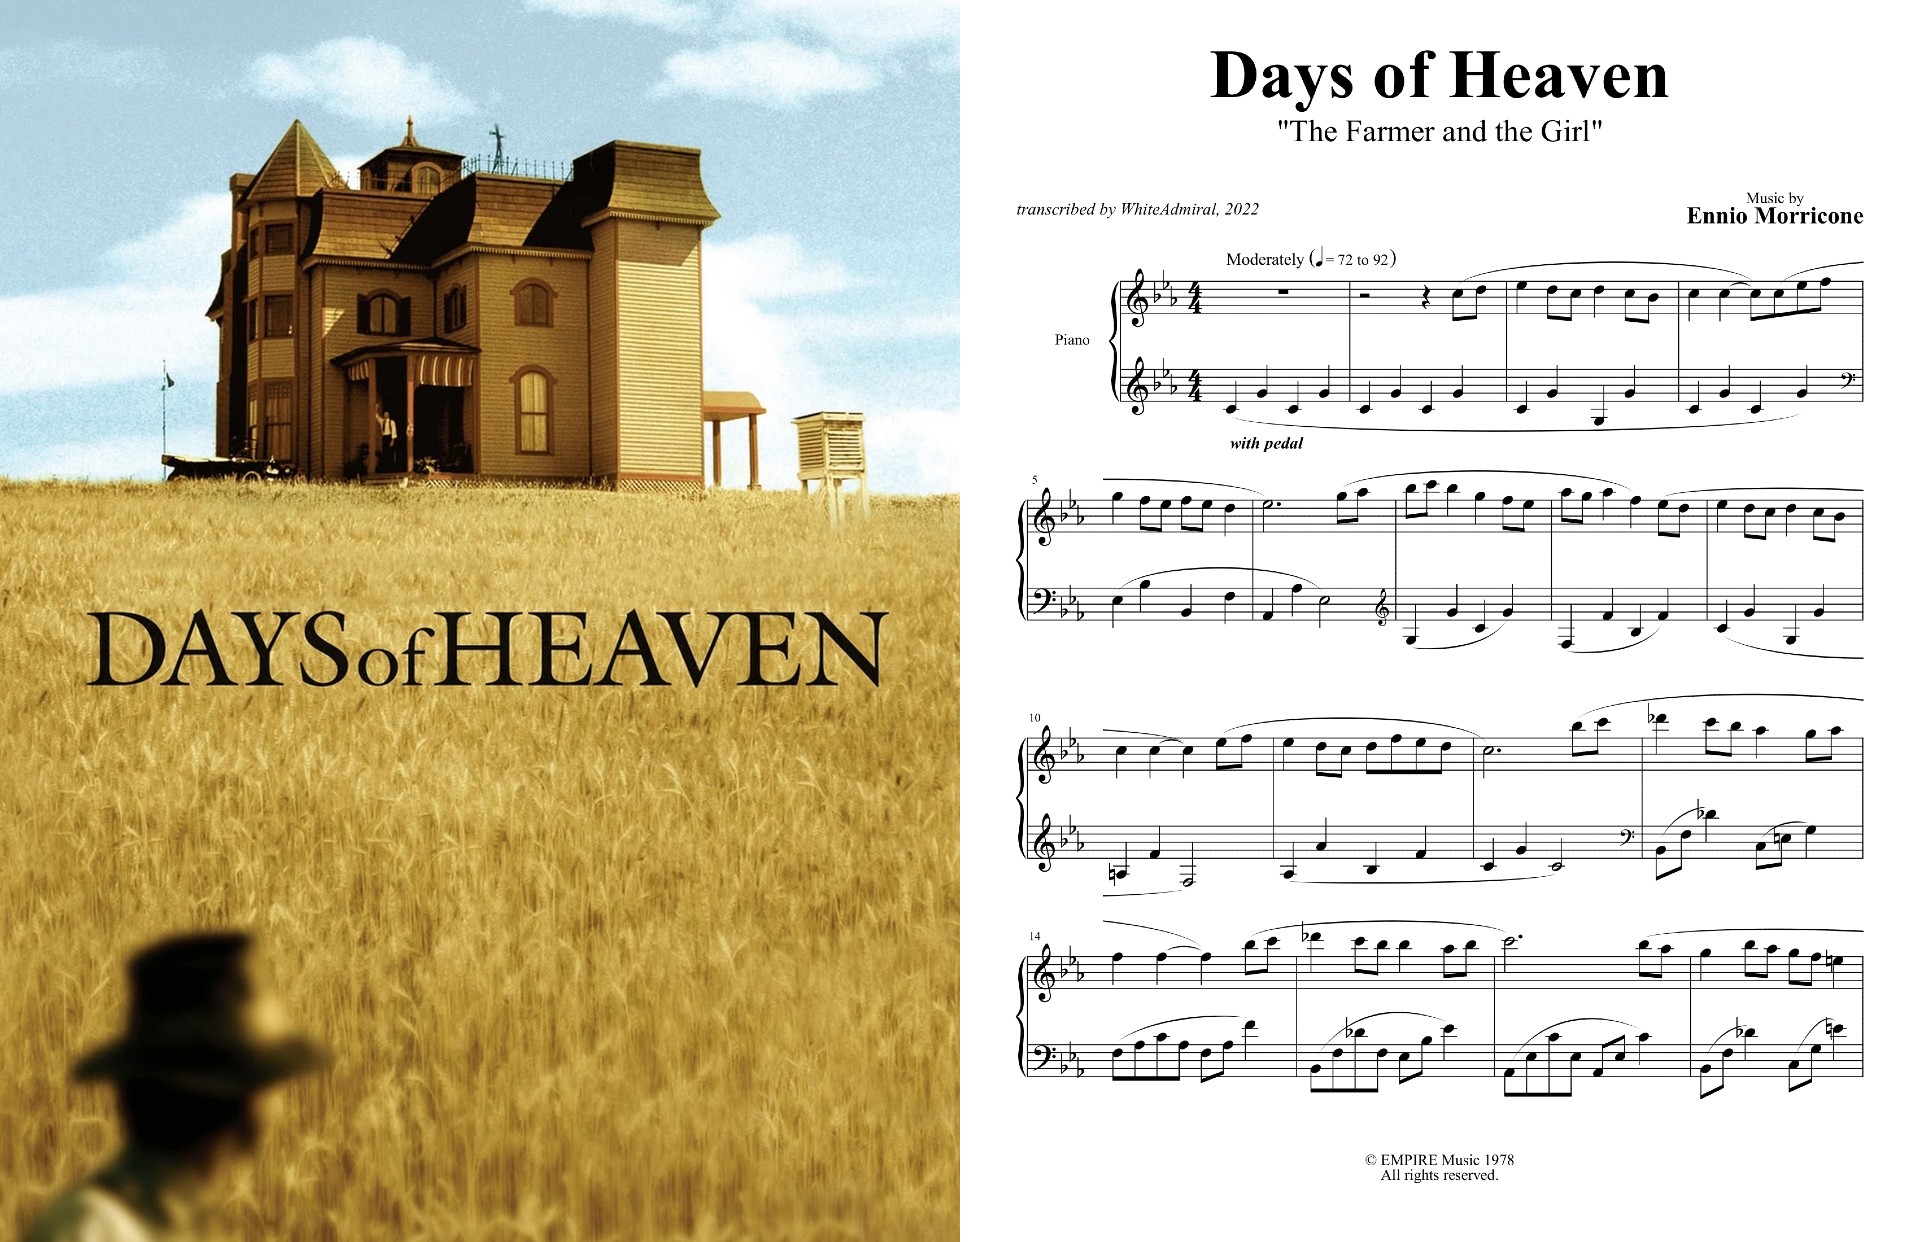 DAYS OF HEAVEN - The Farmer and the Girl.jpg